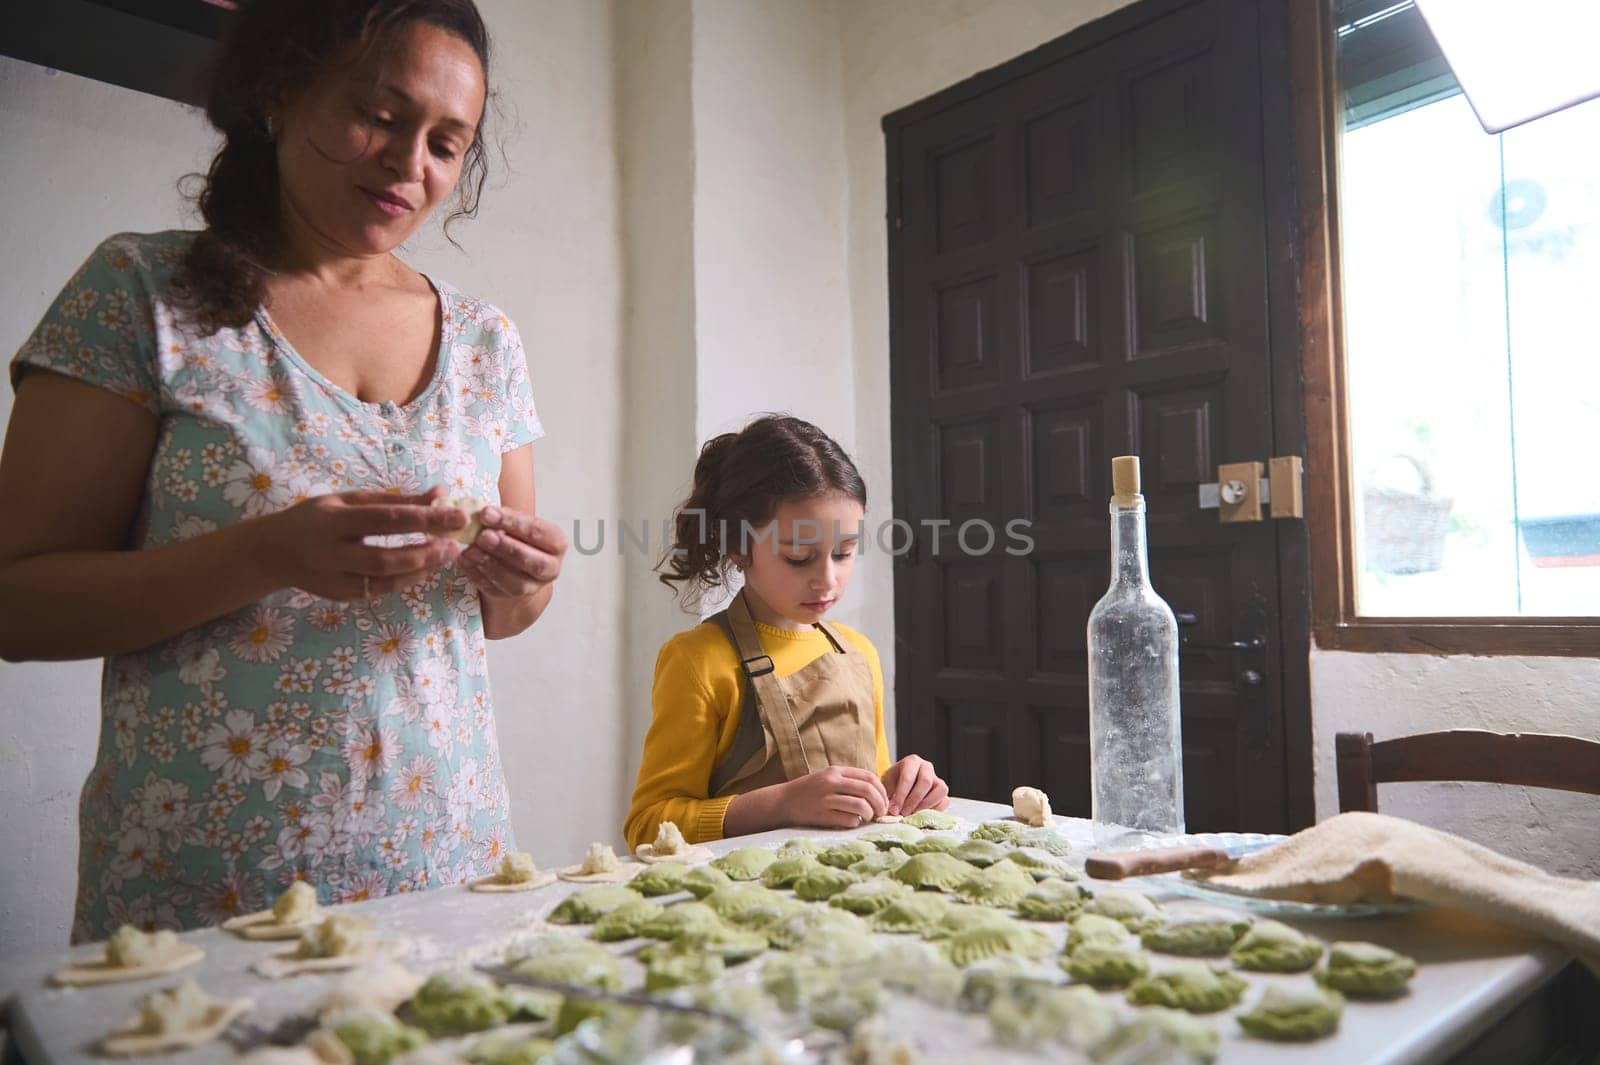 Authentic young pretty woman, mother and her little kid, daughter in the rural kitchen, sculpting dumplings from dough with mashed potatoes filling. Cooking delicious homemade vegetarian dumplings by artgf